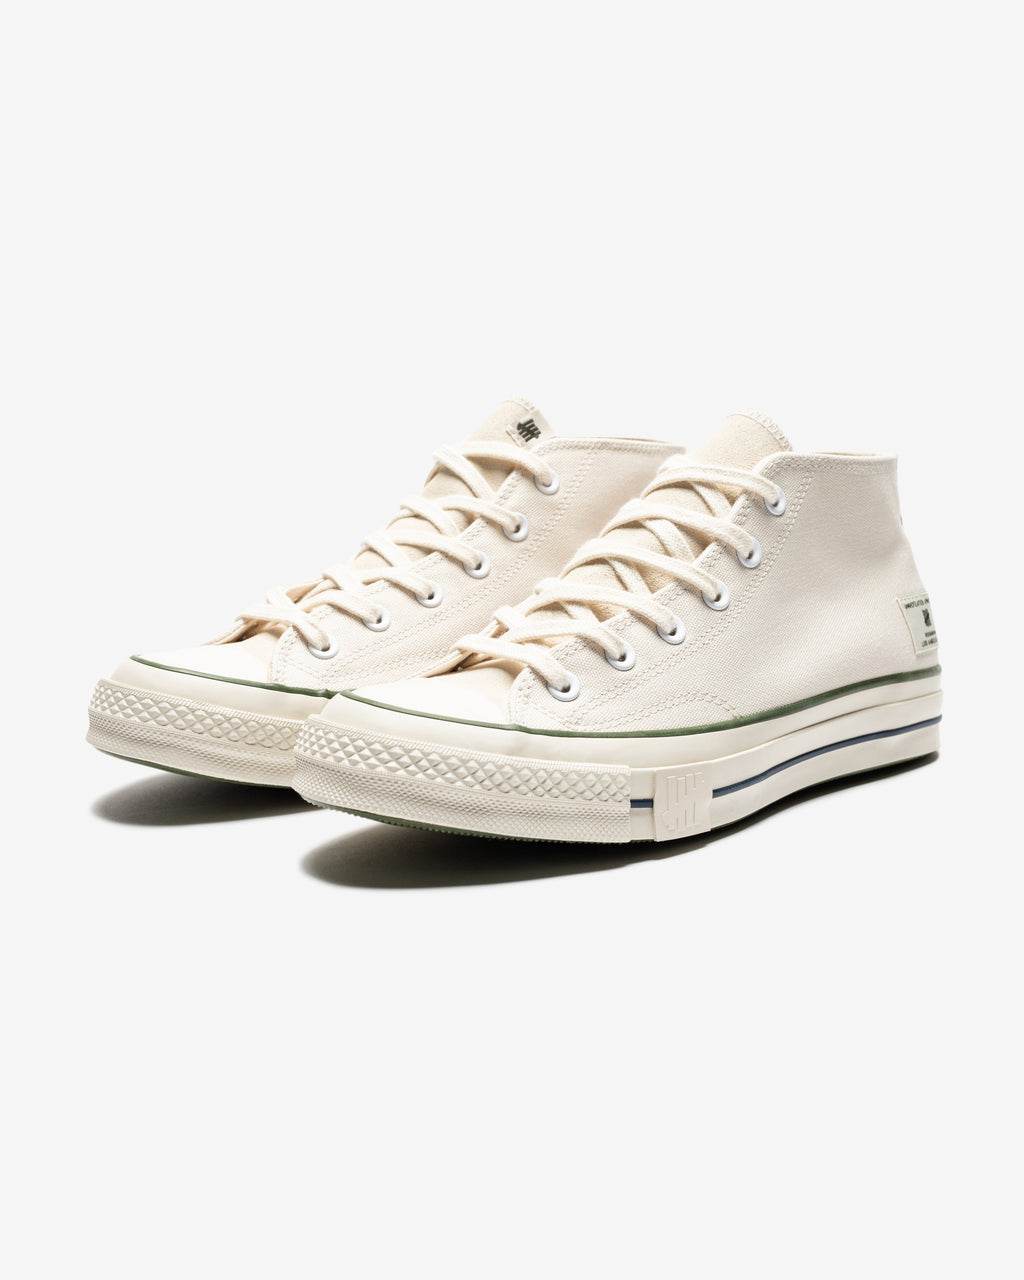 UNDEFEATED X CONVERSE CHUCK 70 MID- PARCHMENT/ CHIVE